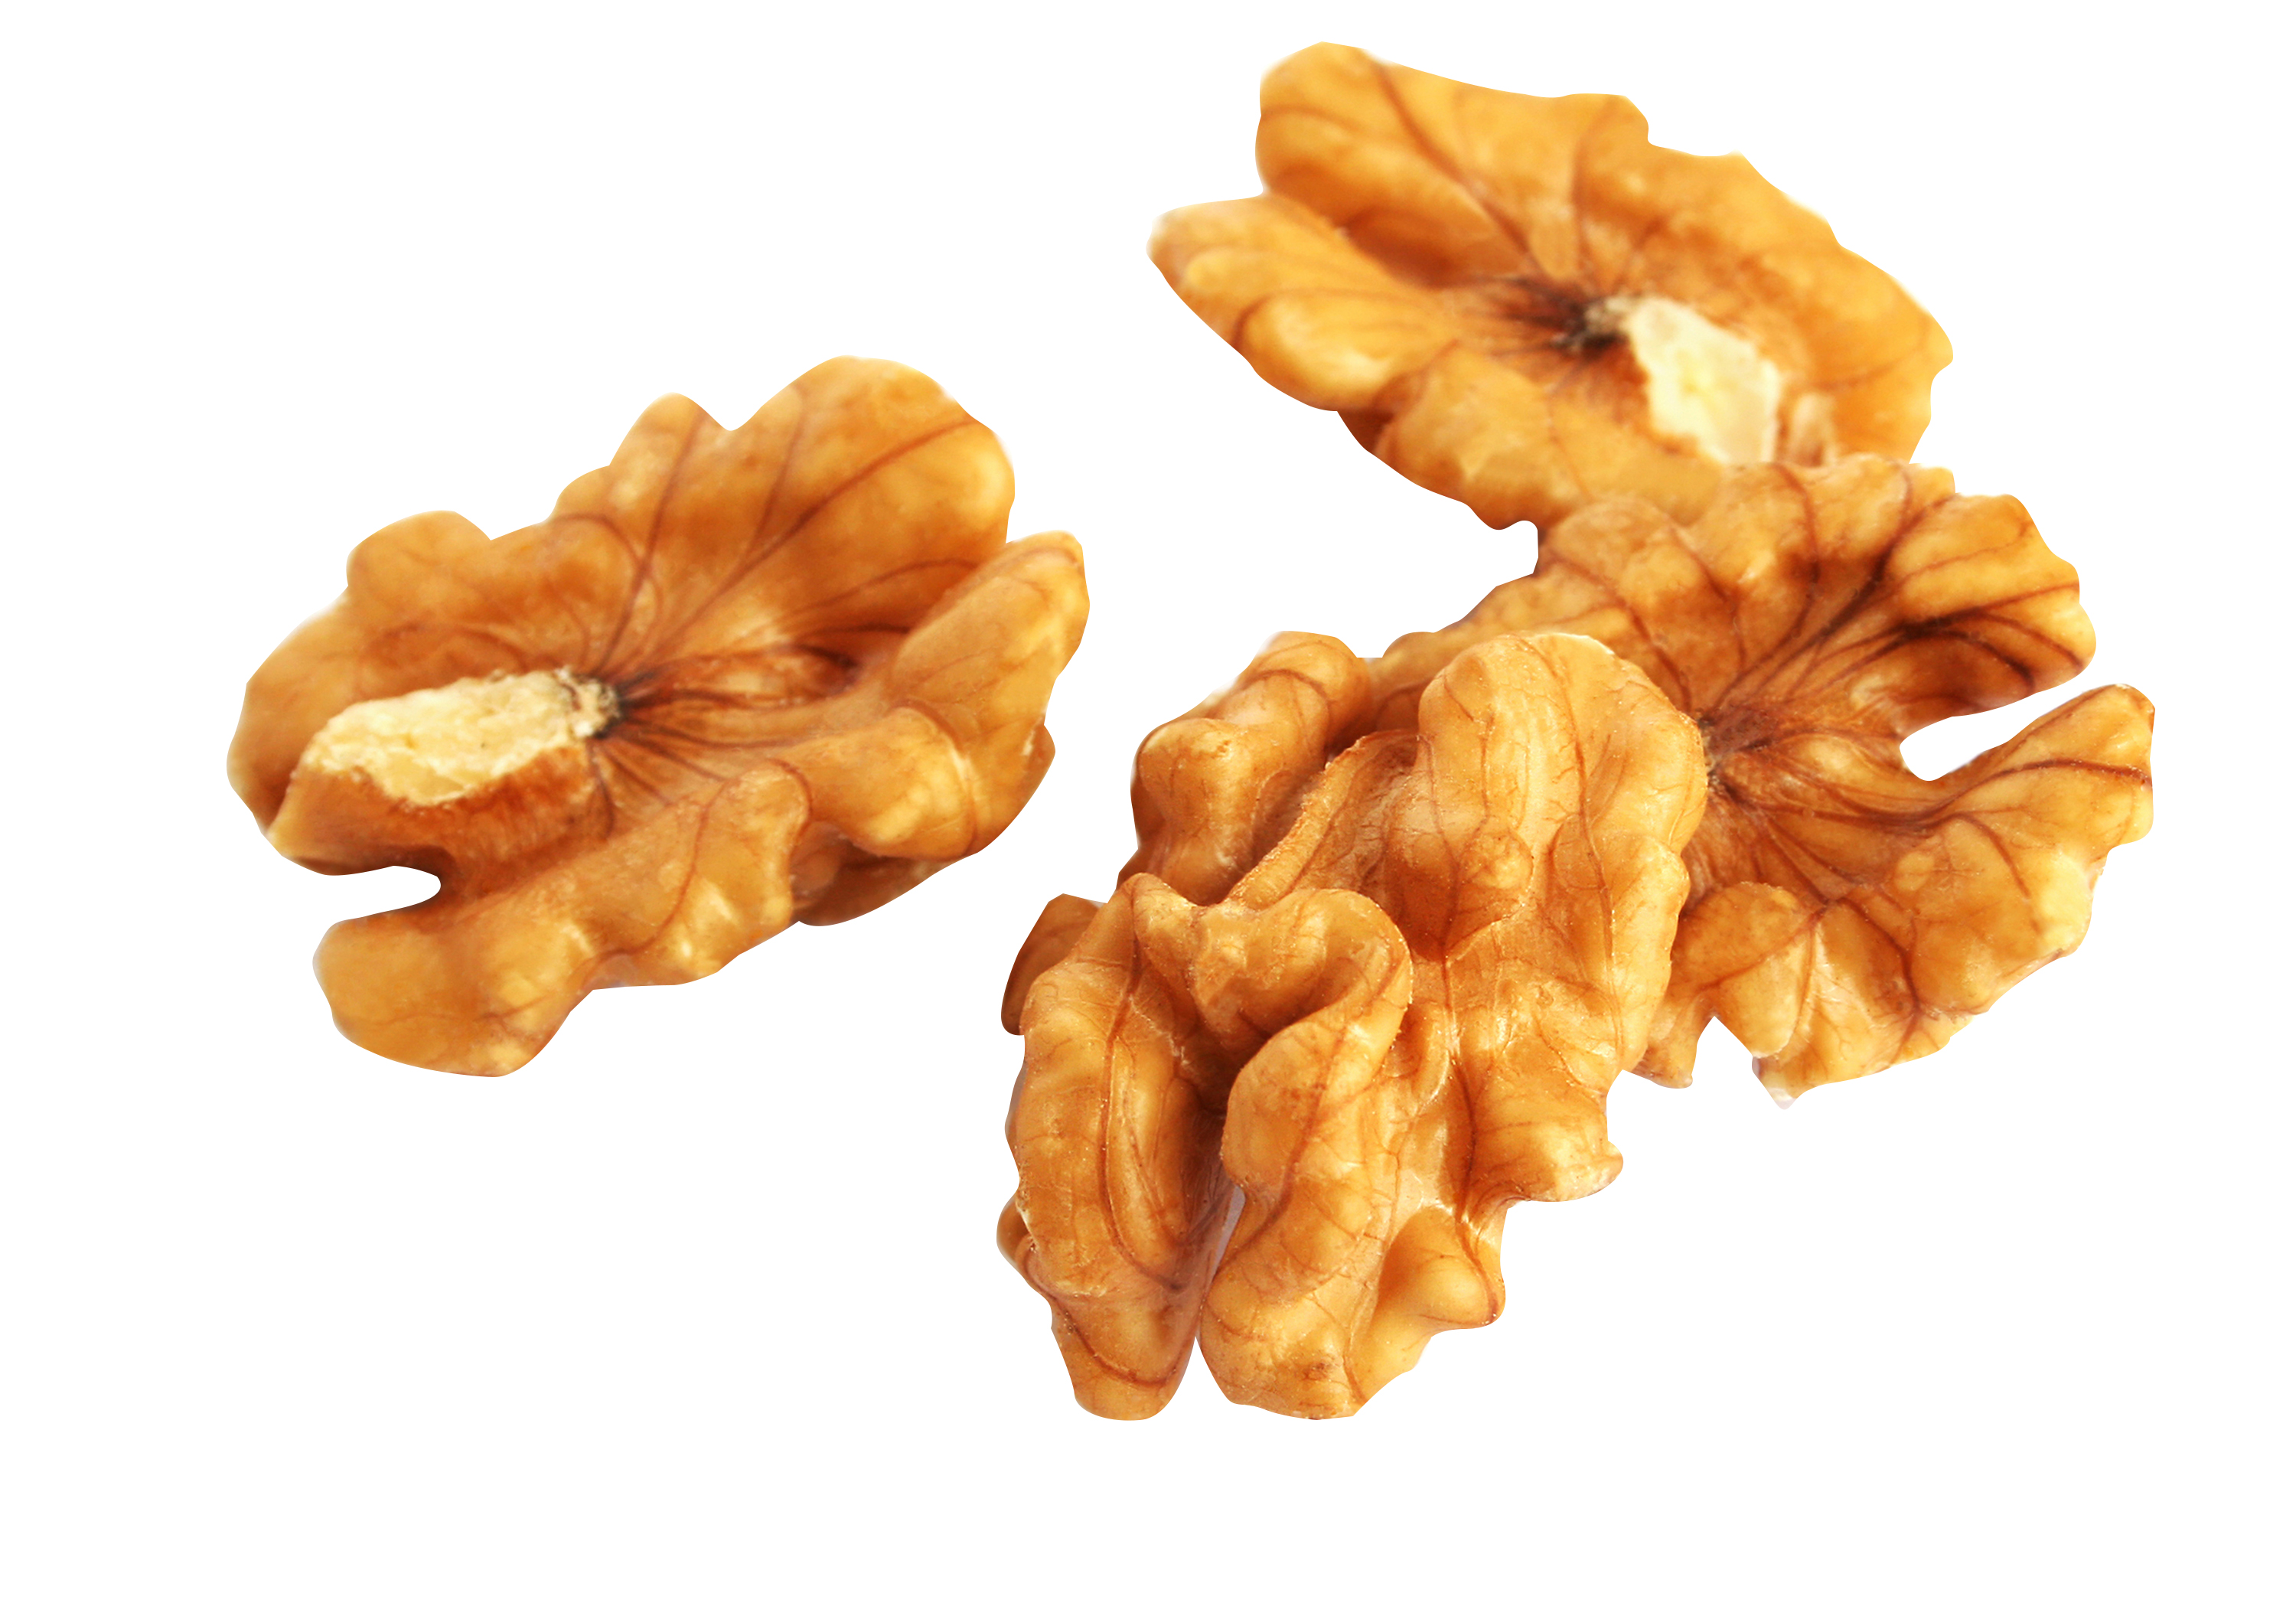 Walnuts are essential to any yummy trail mix 